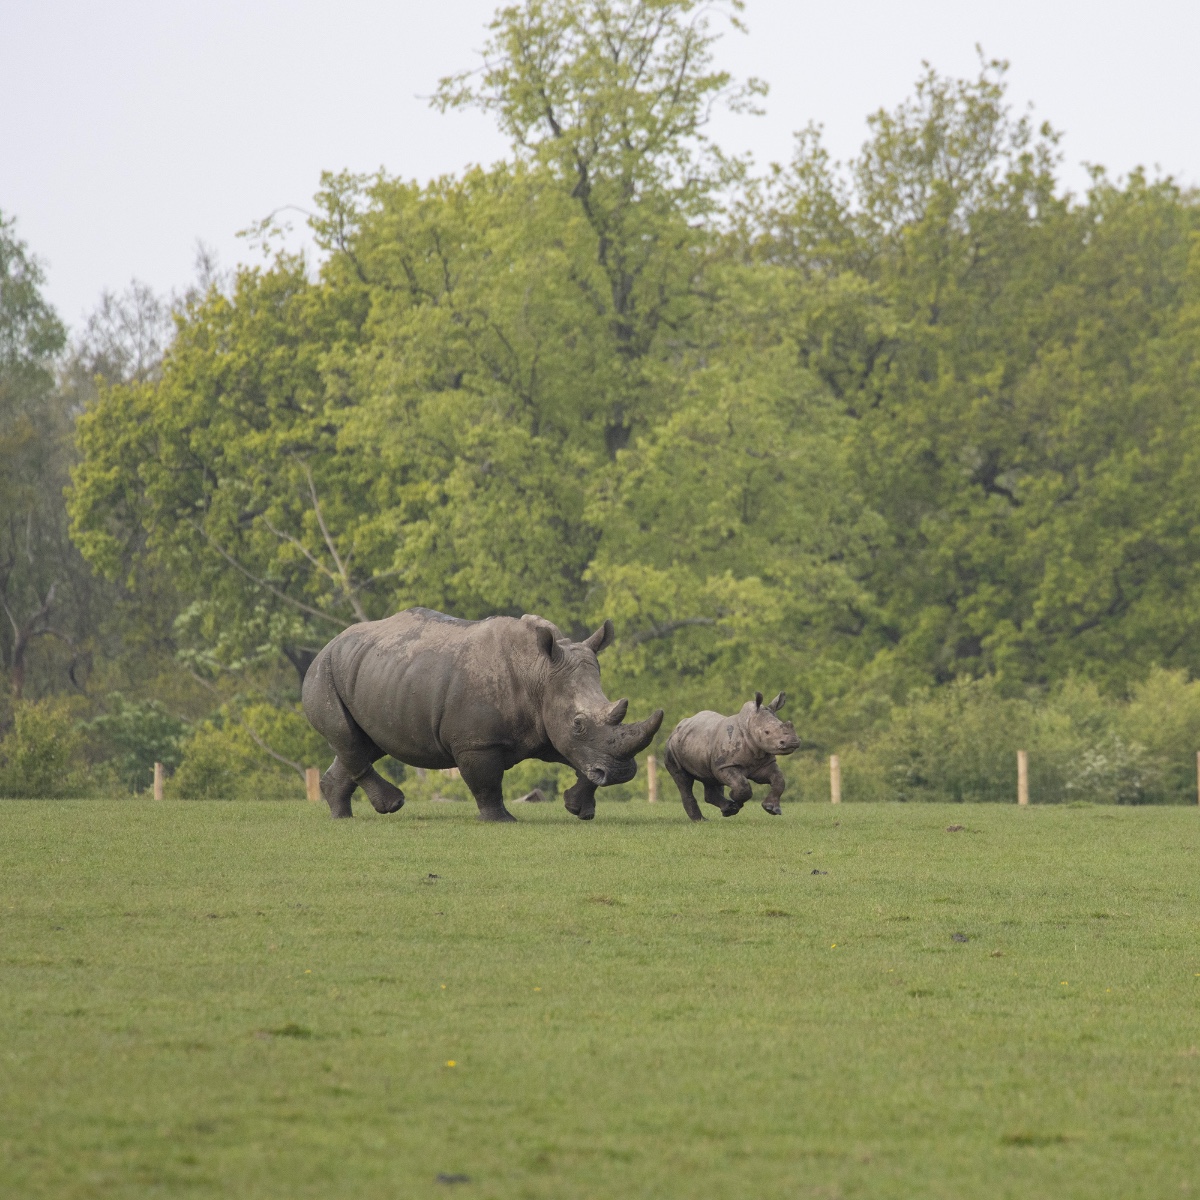 😍 As happy as a baby rhino in mud That's how we feel about the #BankHoliday, join us today with your little ones: brnw.ch/21wJuWn Warning: Expect more adorable baby rhino posts ahead 🤩